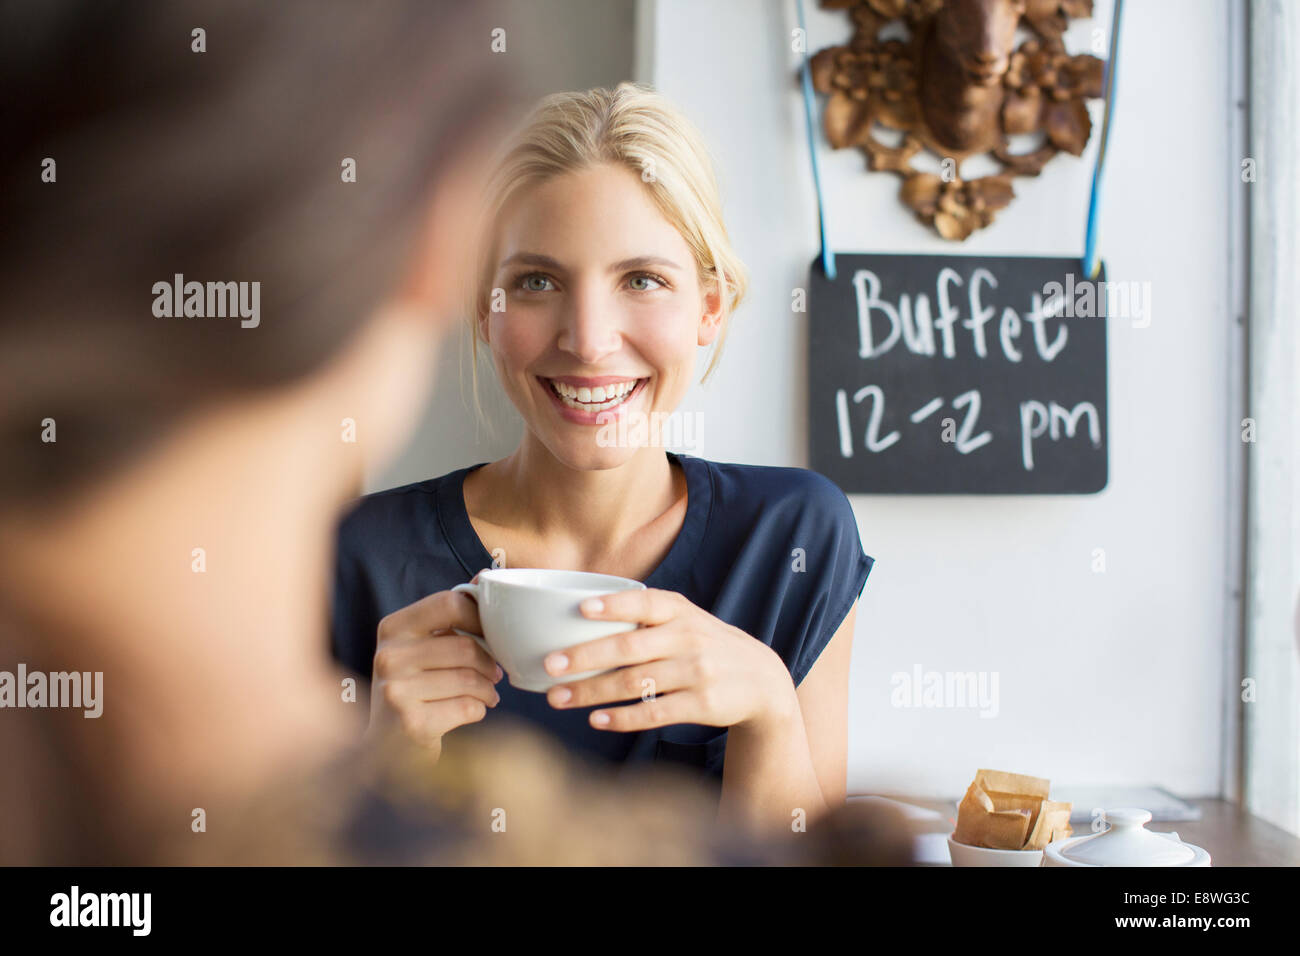 Women having coffee together in cafe Stock Photo